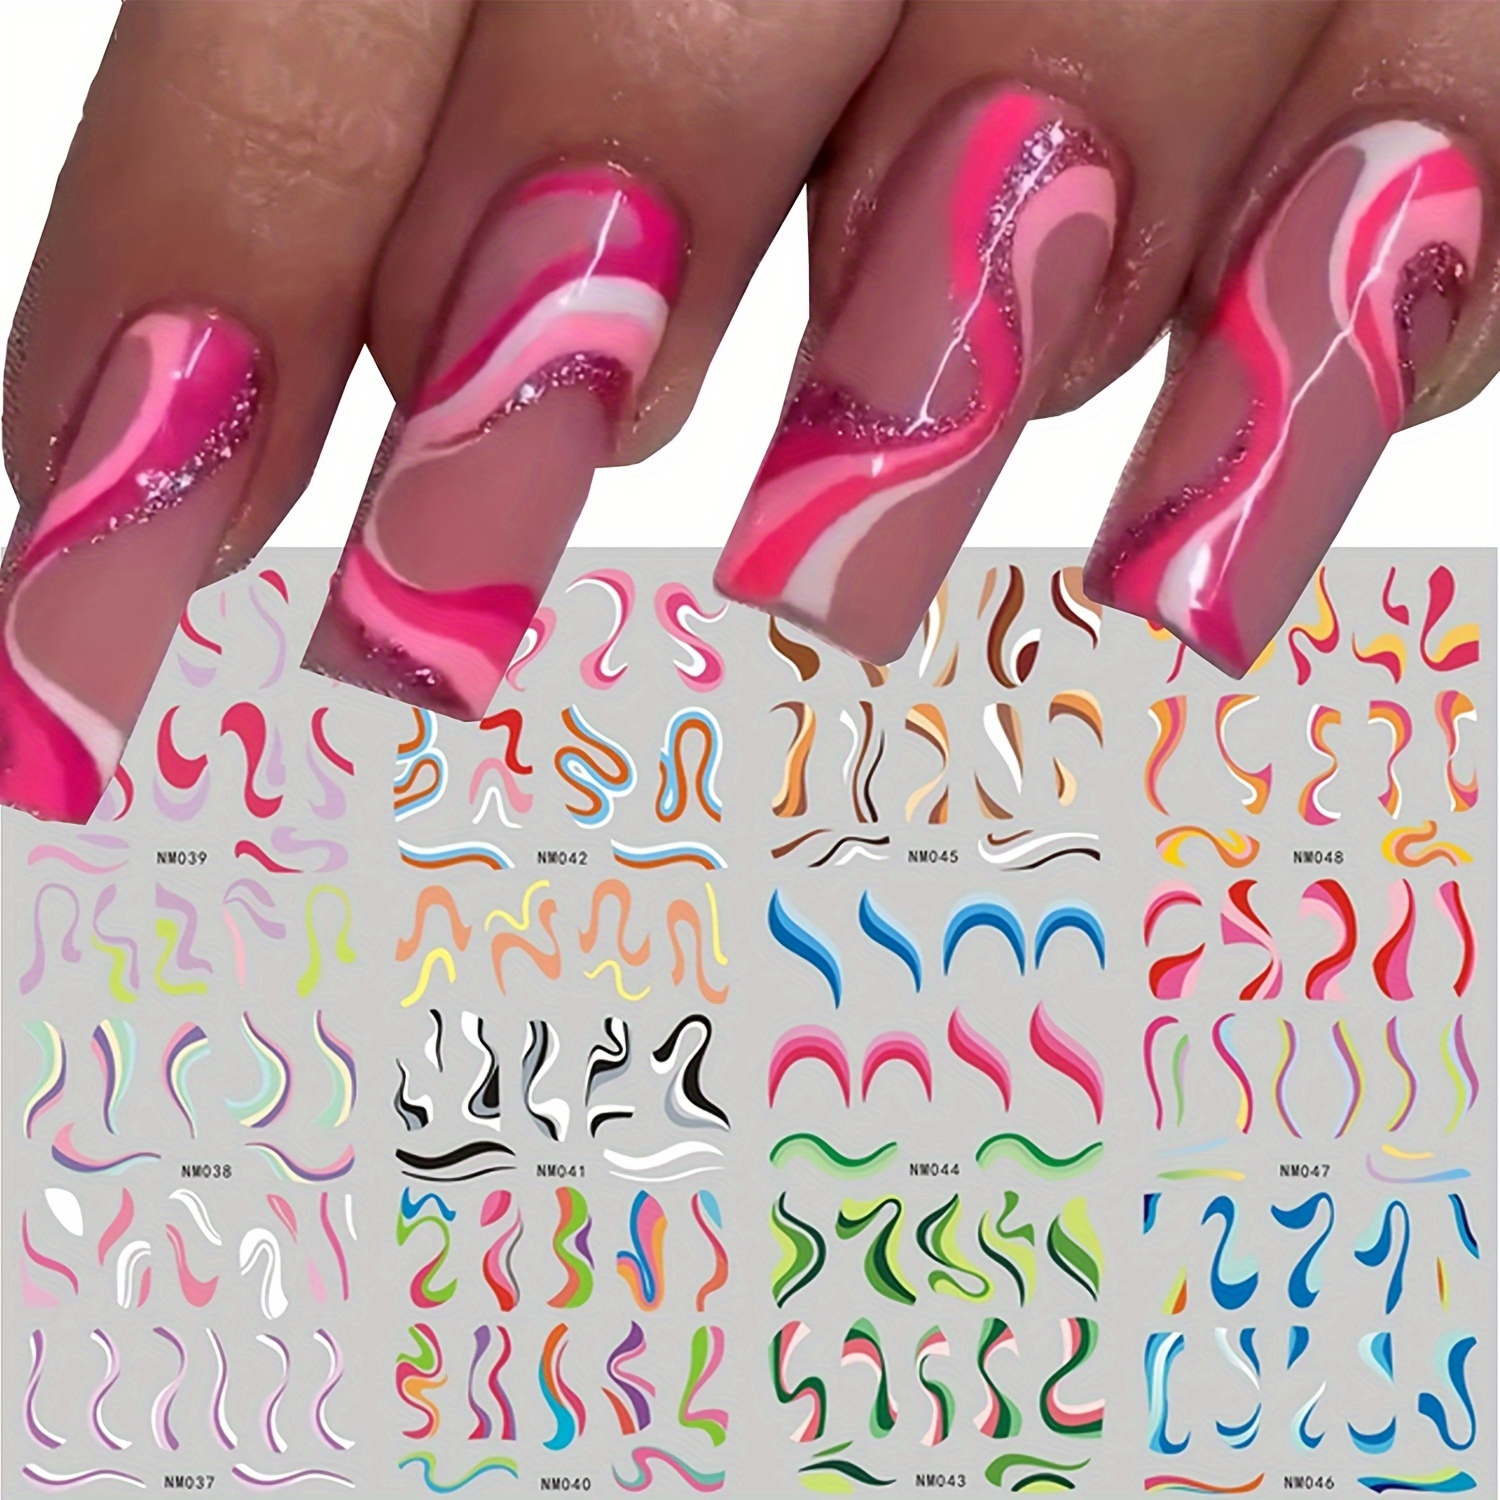 

Rainbow Stripe Water Transfer Nail Stickers - 12 Sheets, Self-adhesive Nail Decals For Vibrant Geometric Designs, Easy Apply & Disposable, Perfect For Diy & Salon Manicures